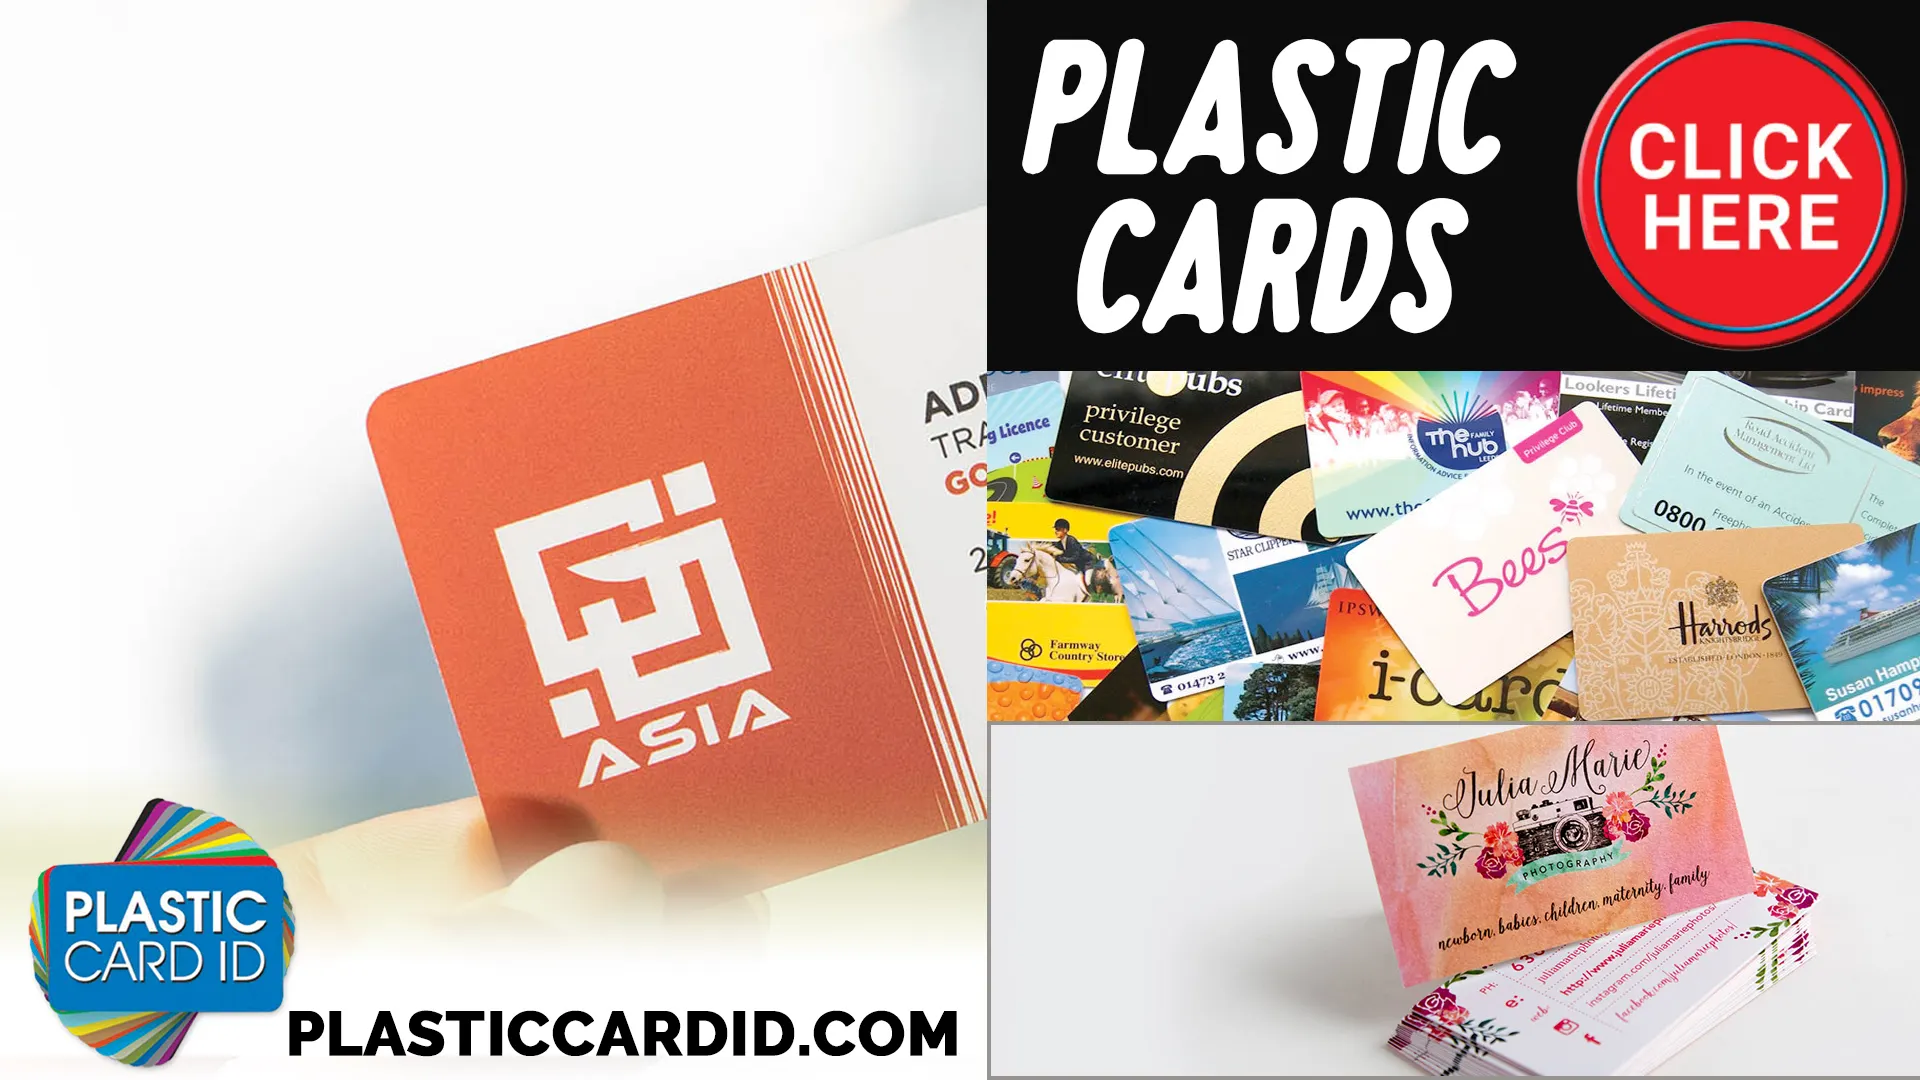 Plastic Card ID
's Commitment to Sustainability Beyond Recycling